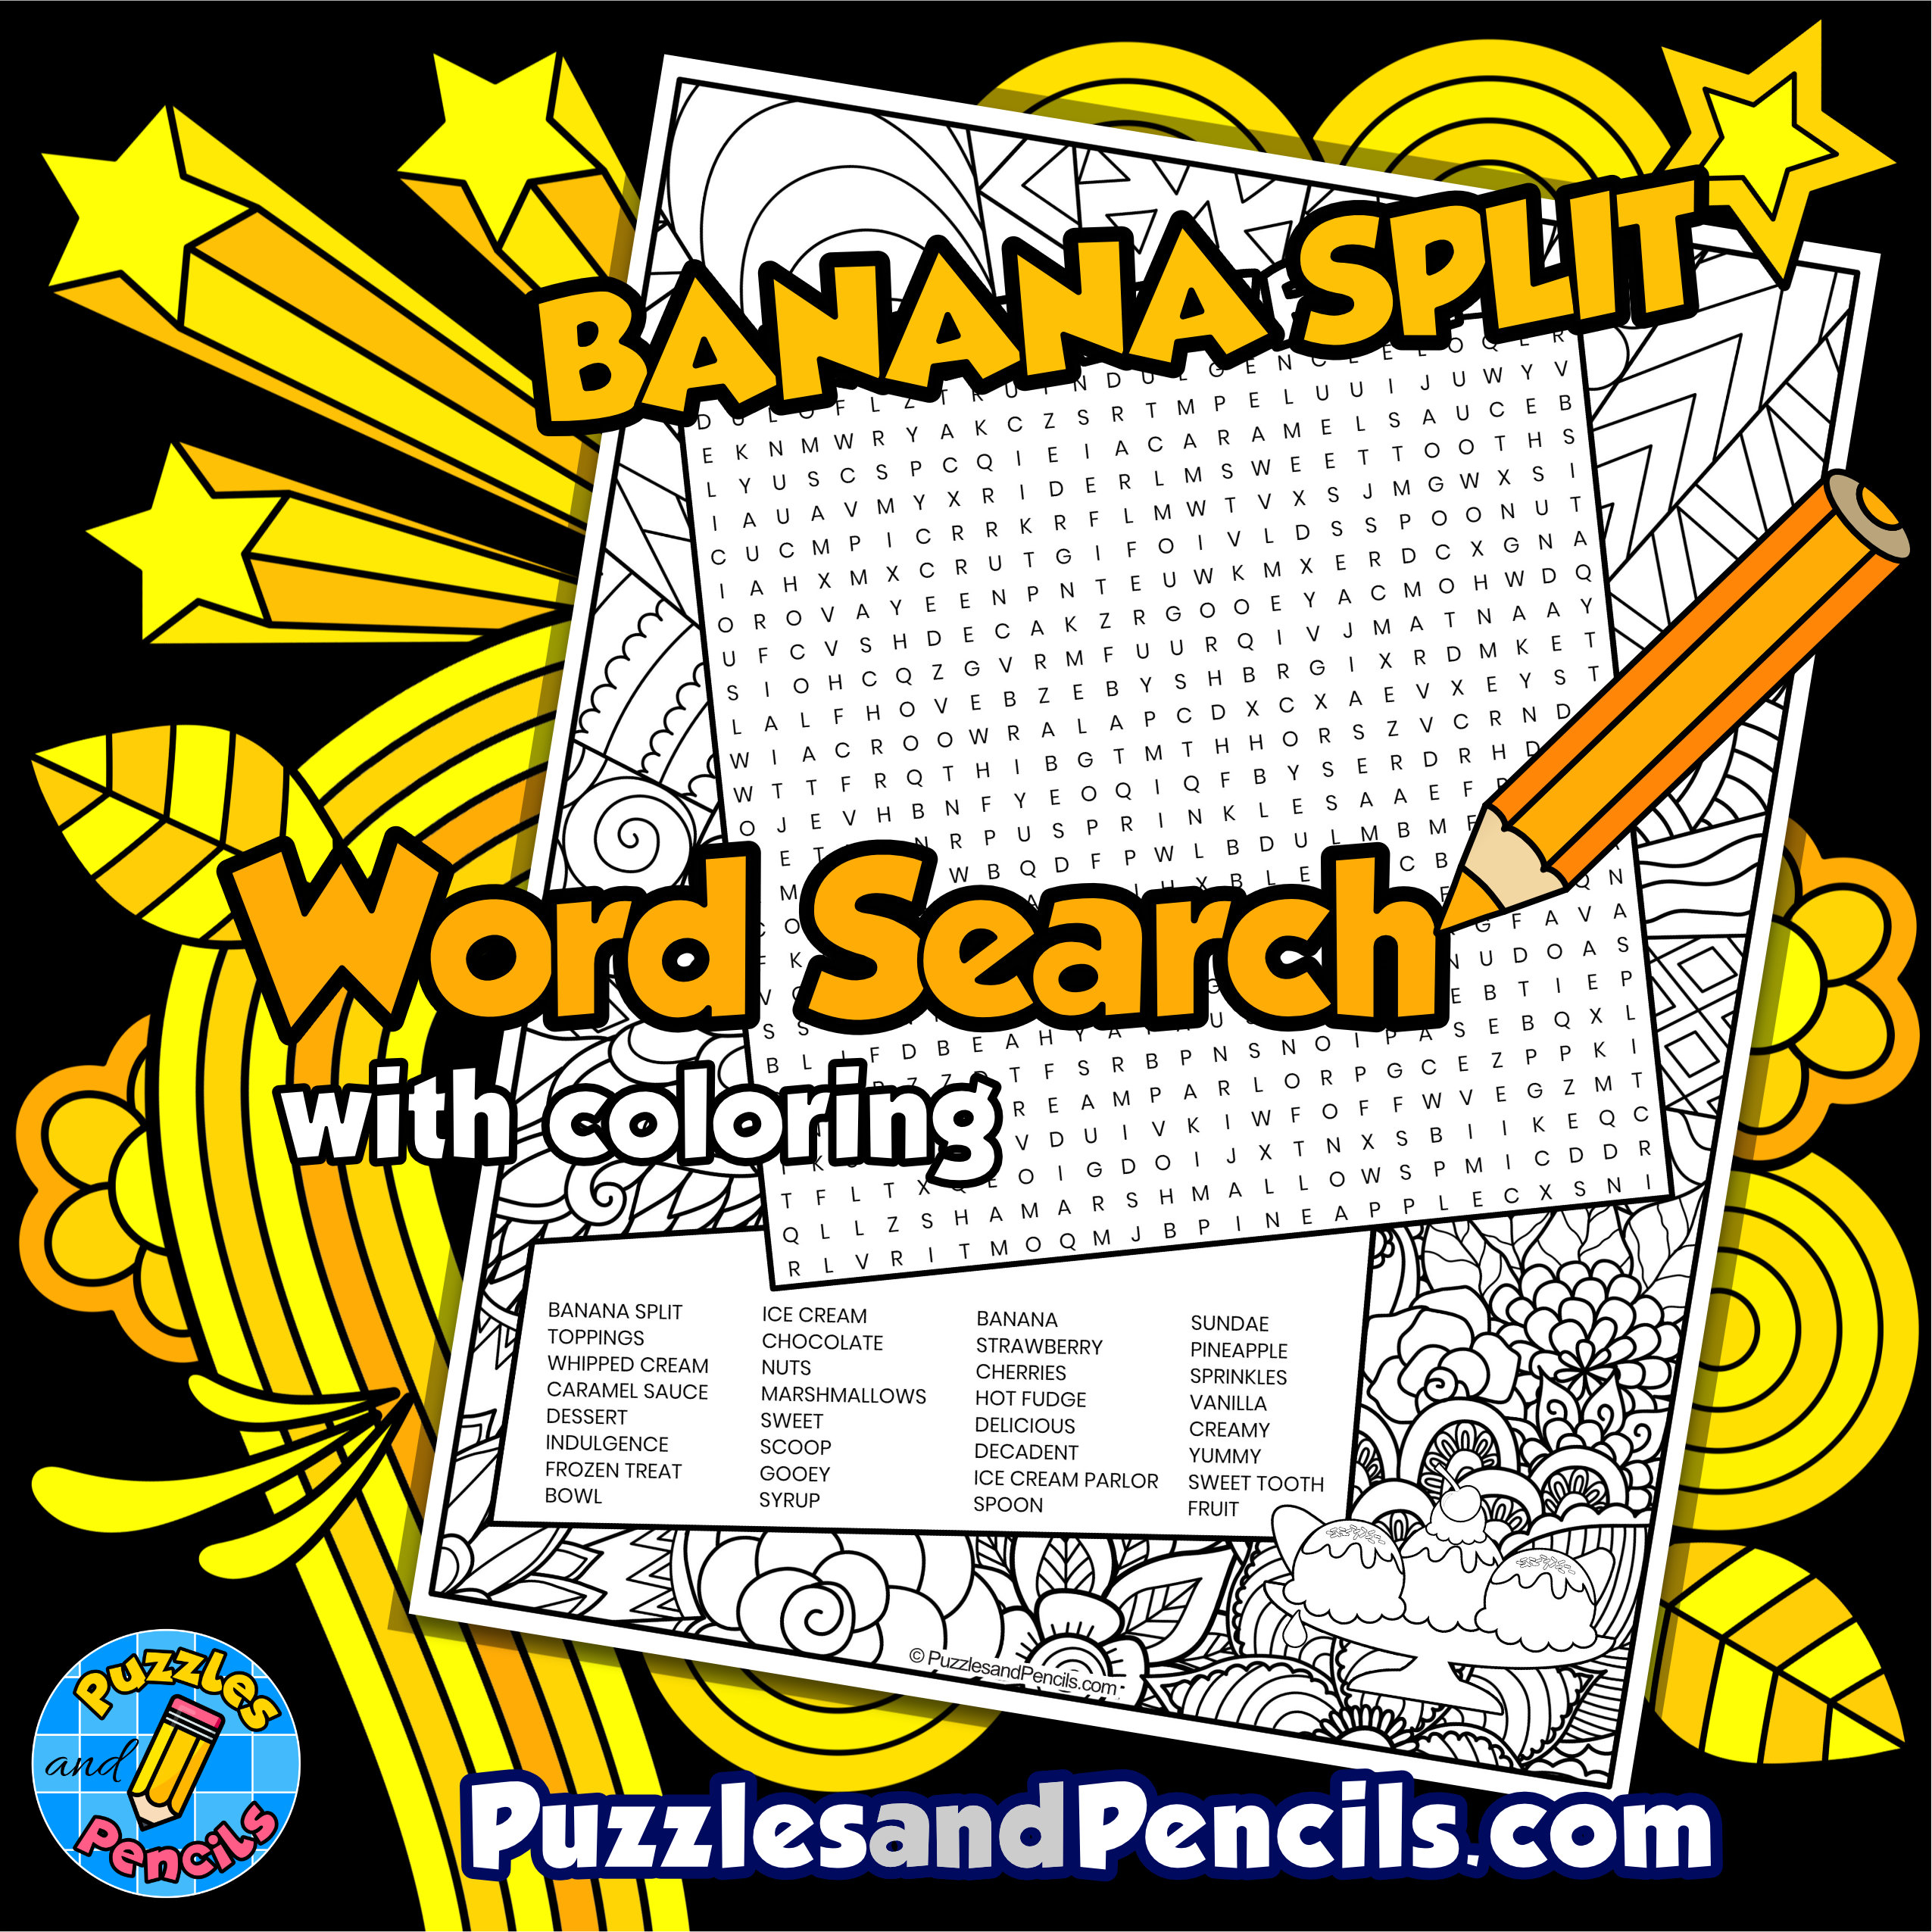 Banana split word search puzzle with coloring wordsearch made by teachers